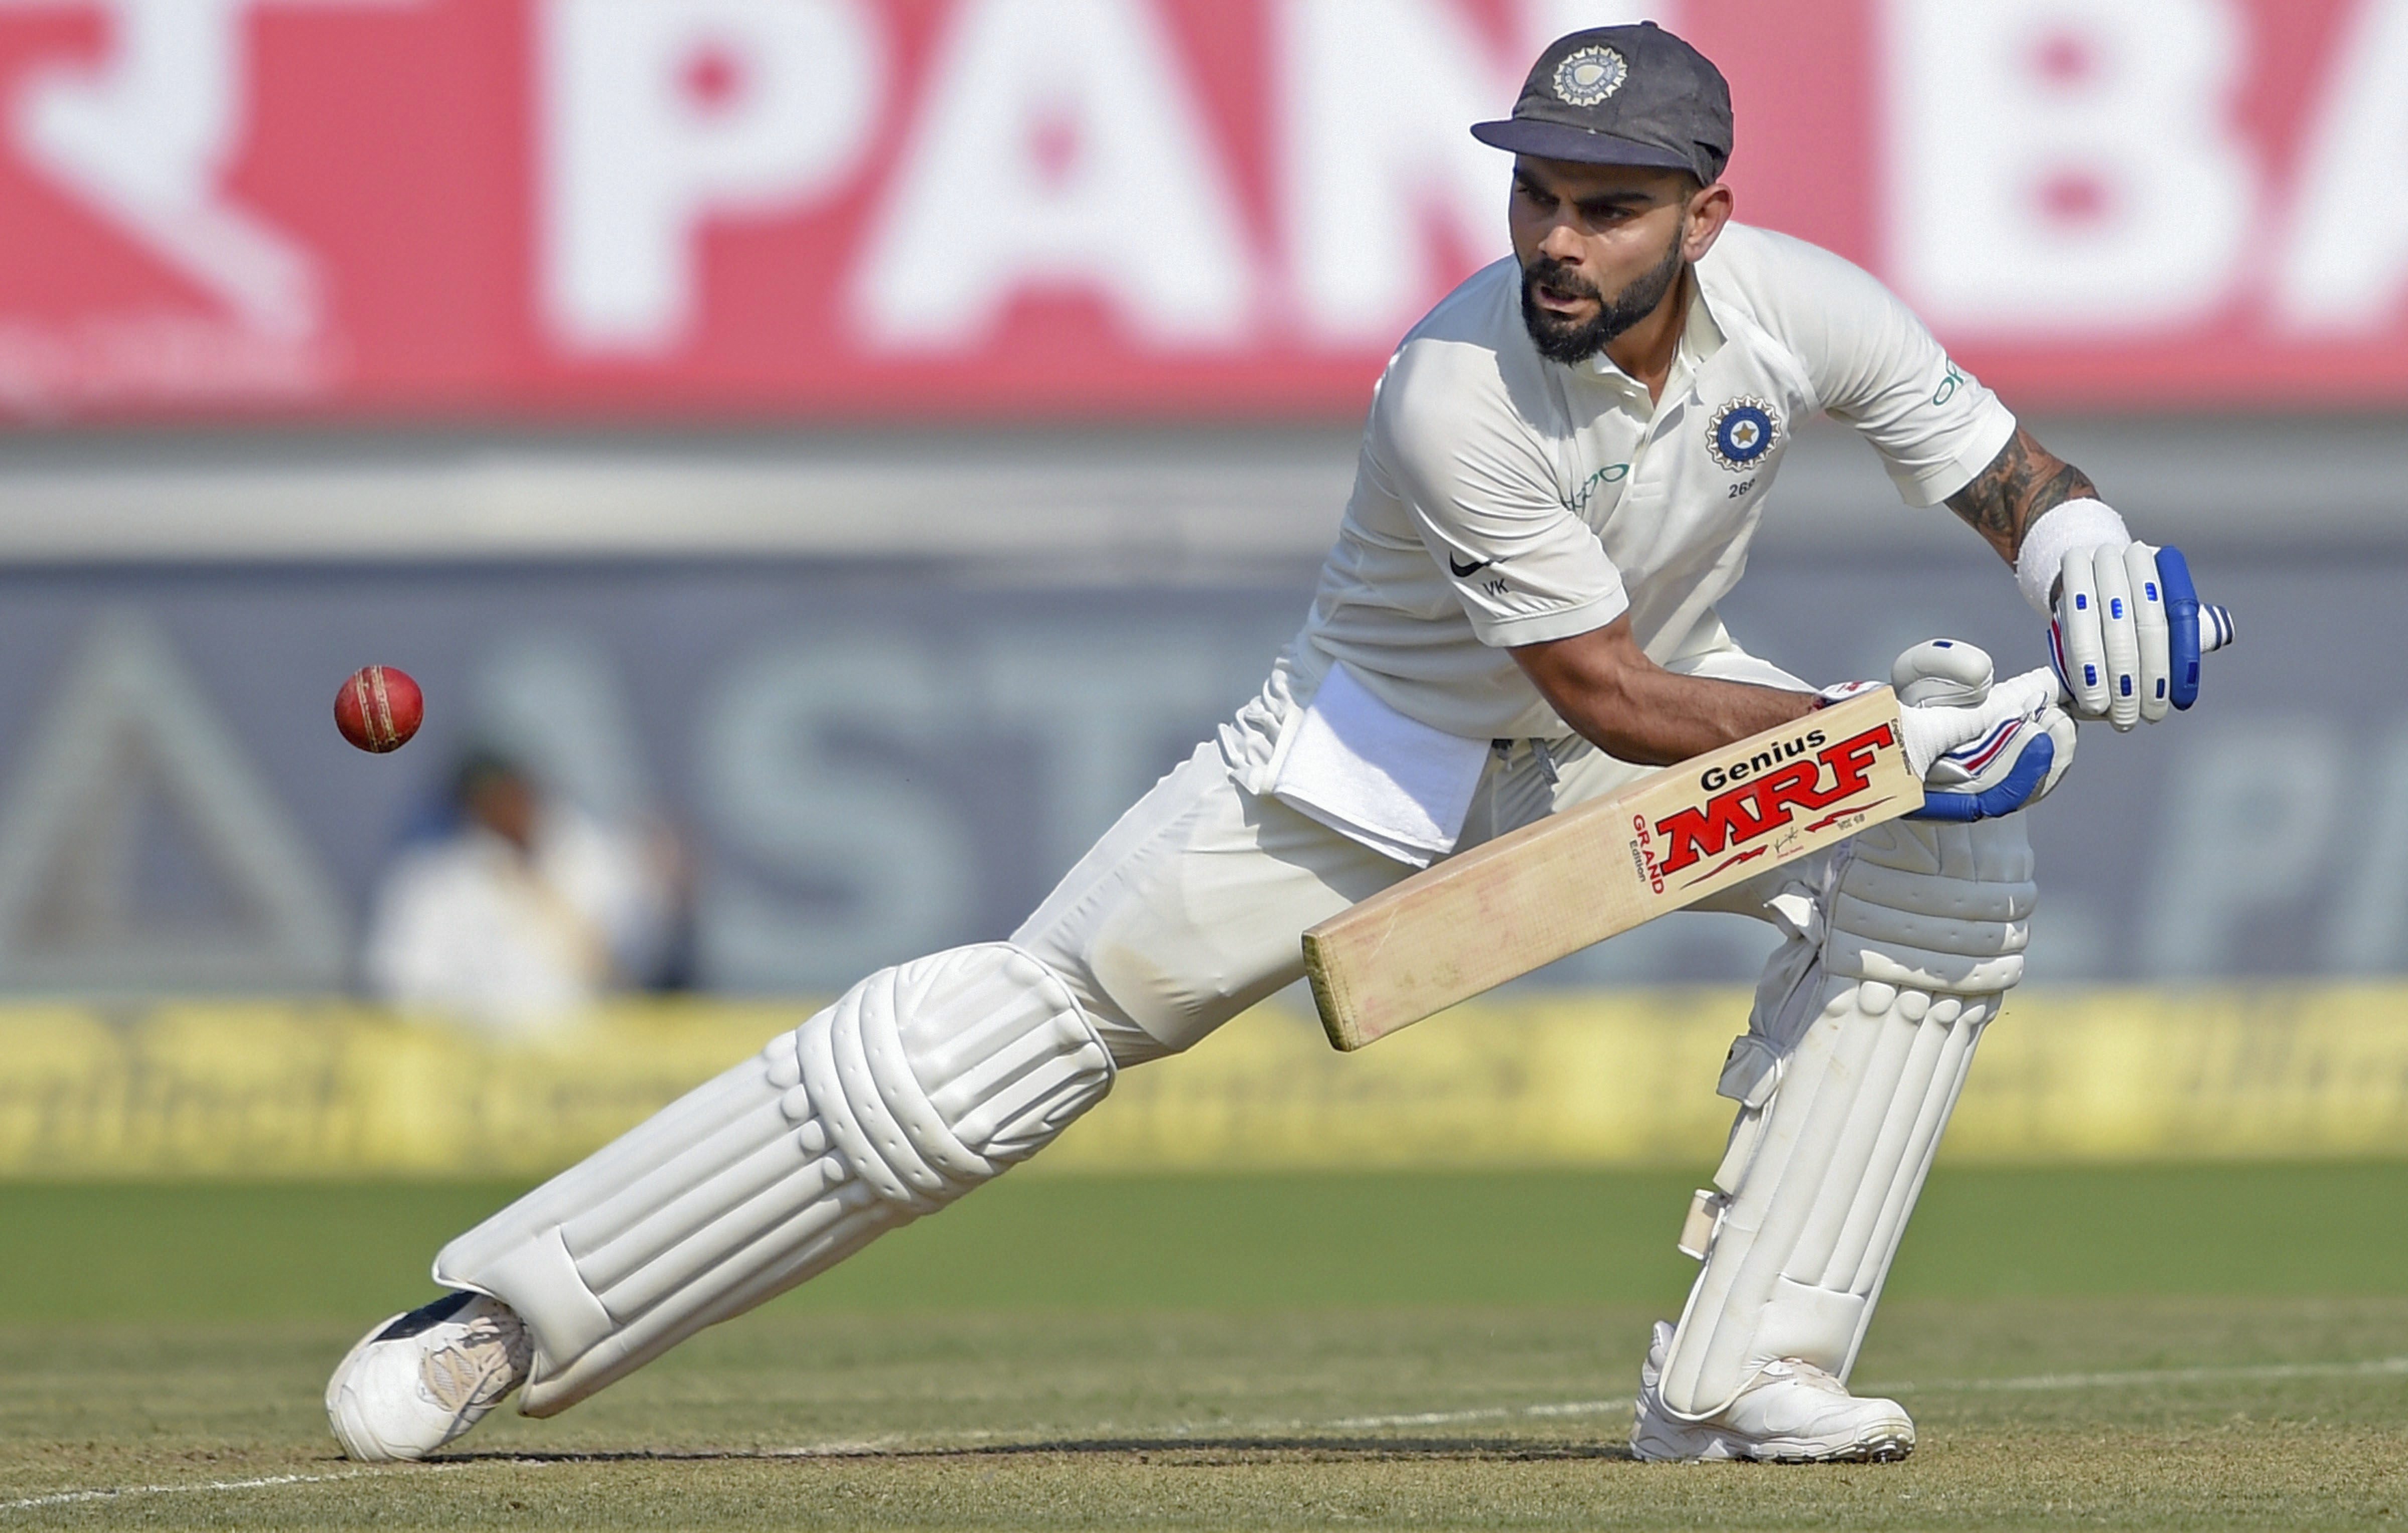 Indian batsman Virat Kohli plays a shot during the first test cricket match played between India and West Indies, in Rajkot - PTI